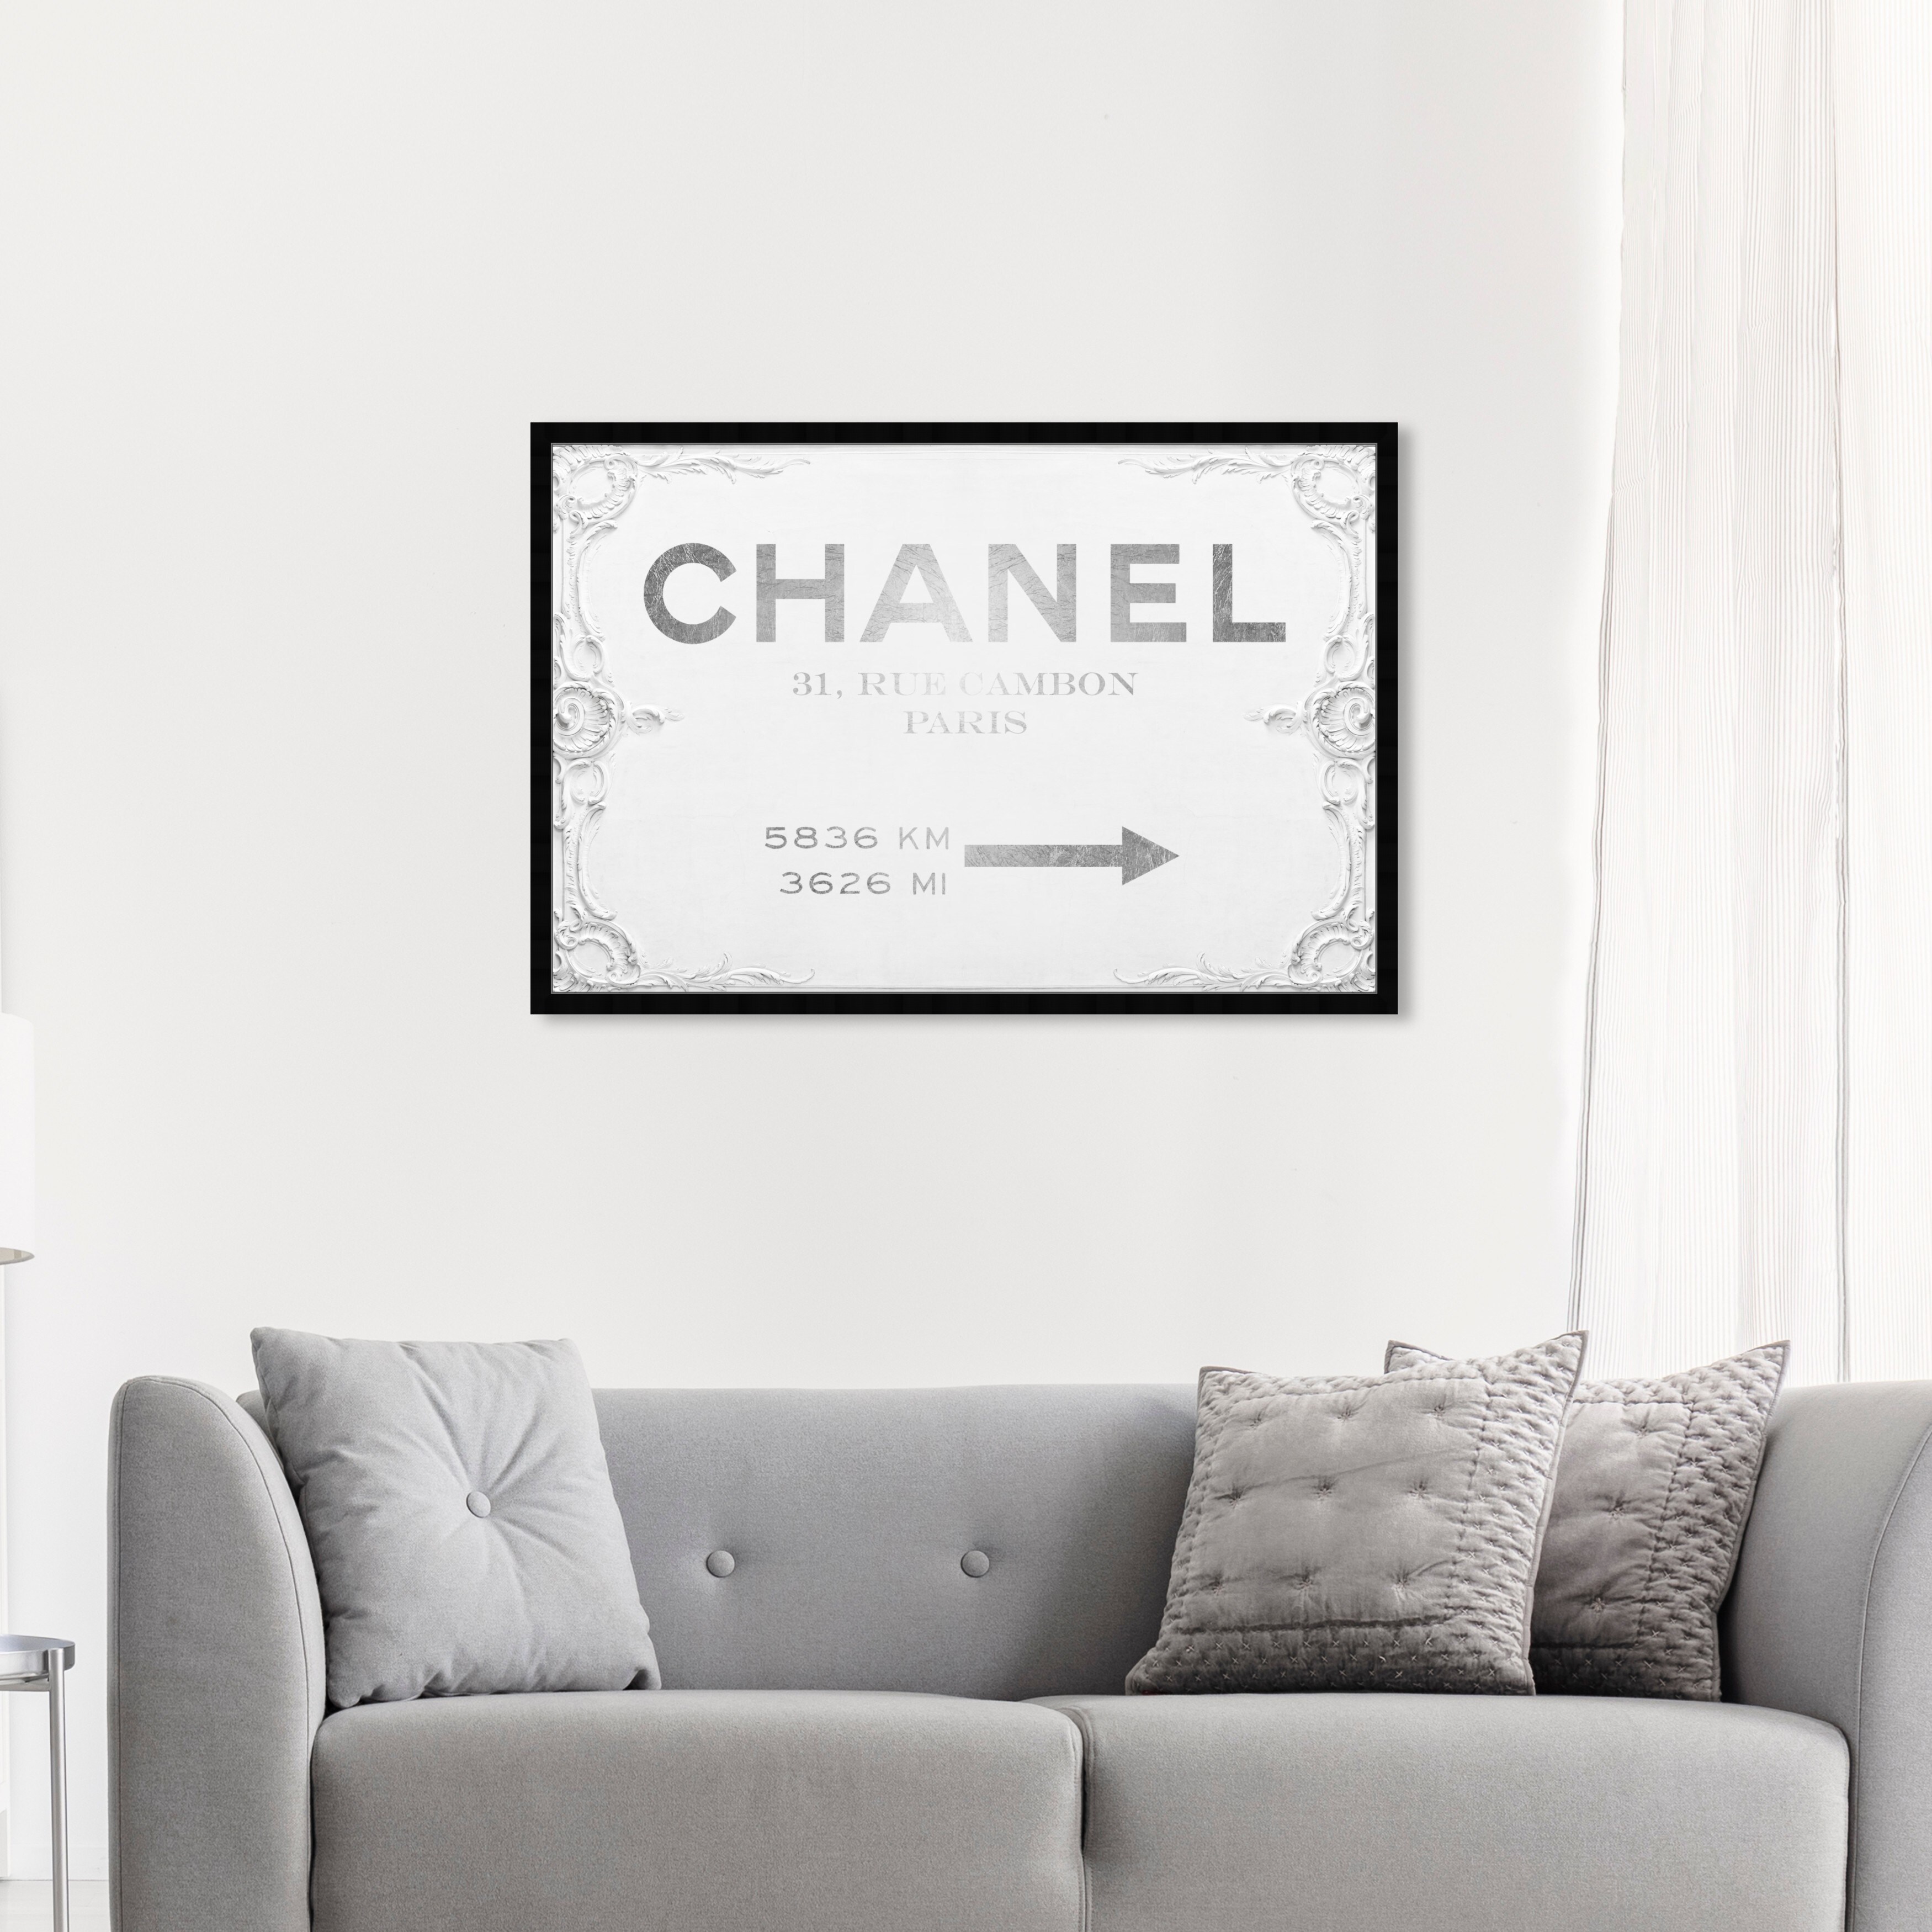 chanel decorations for bedroom black and white